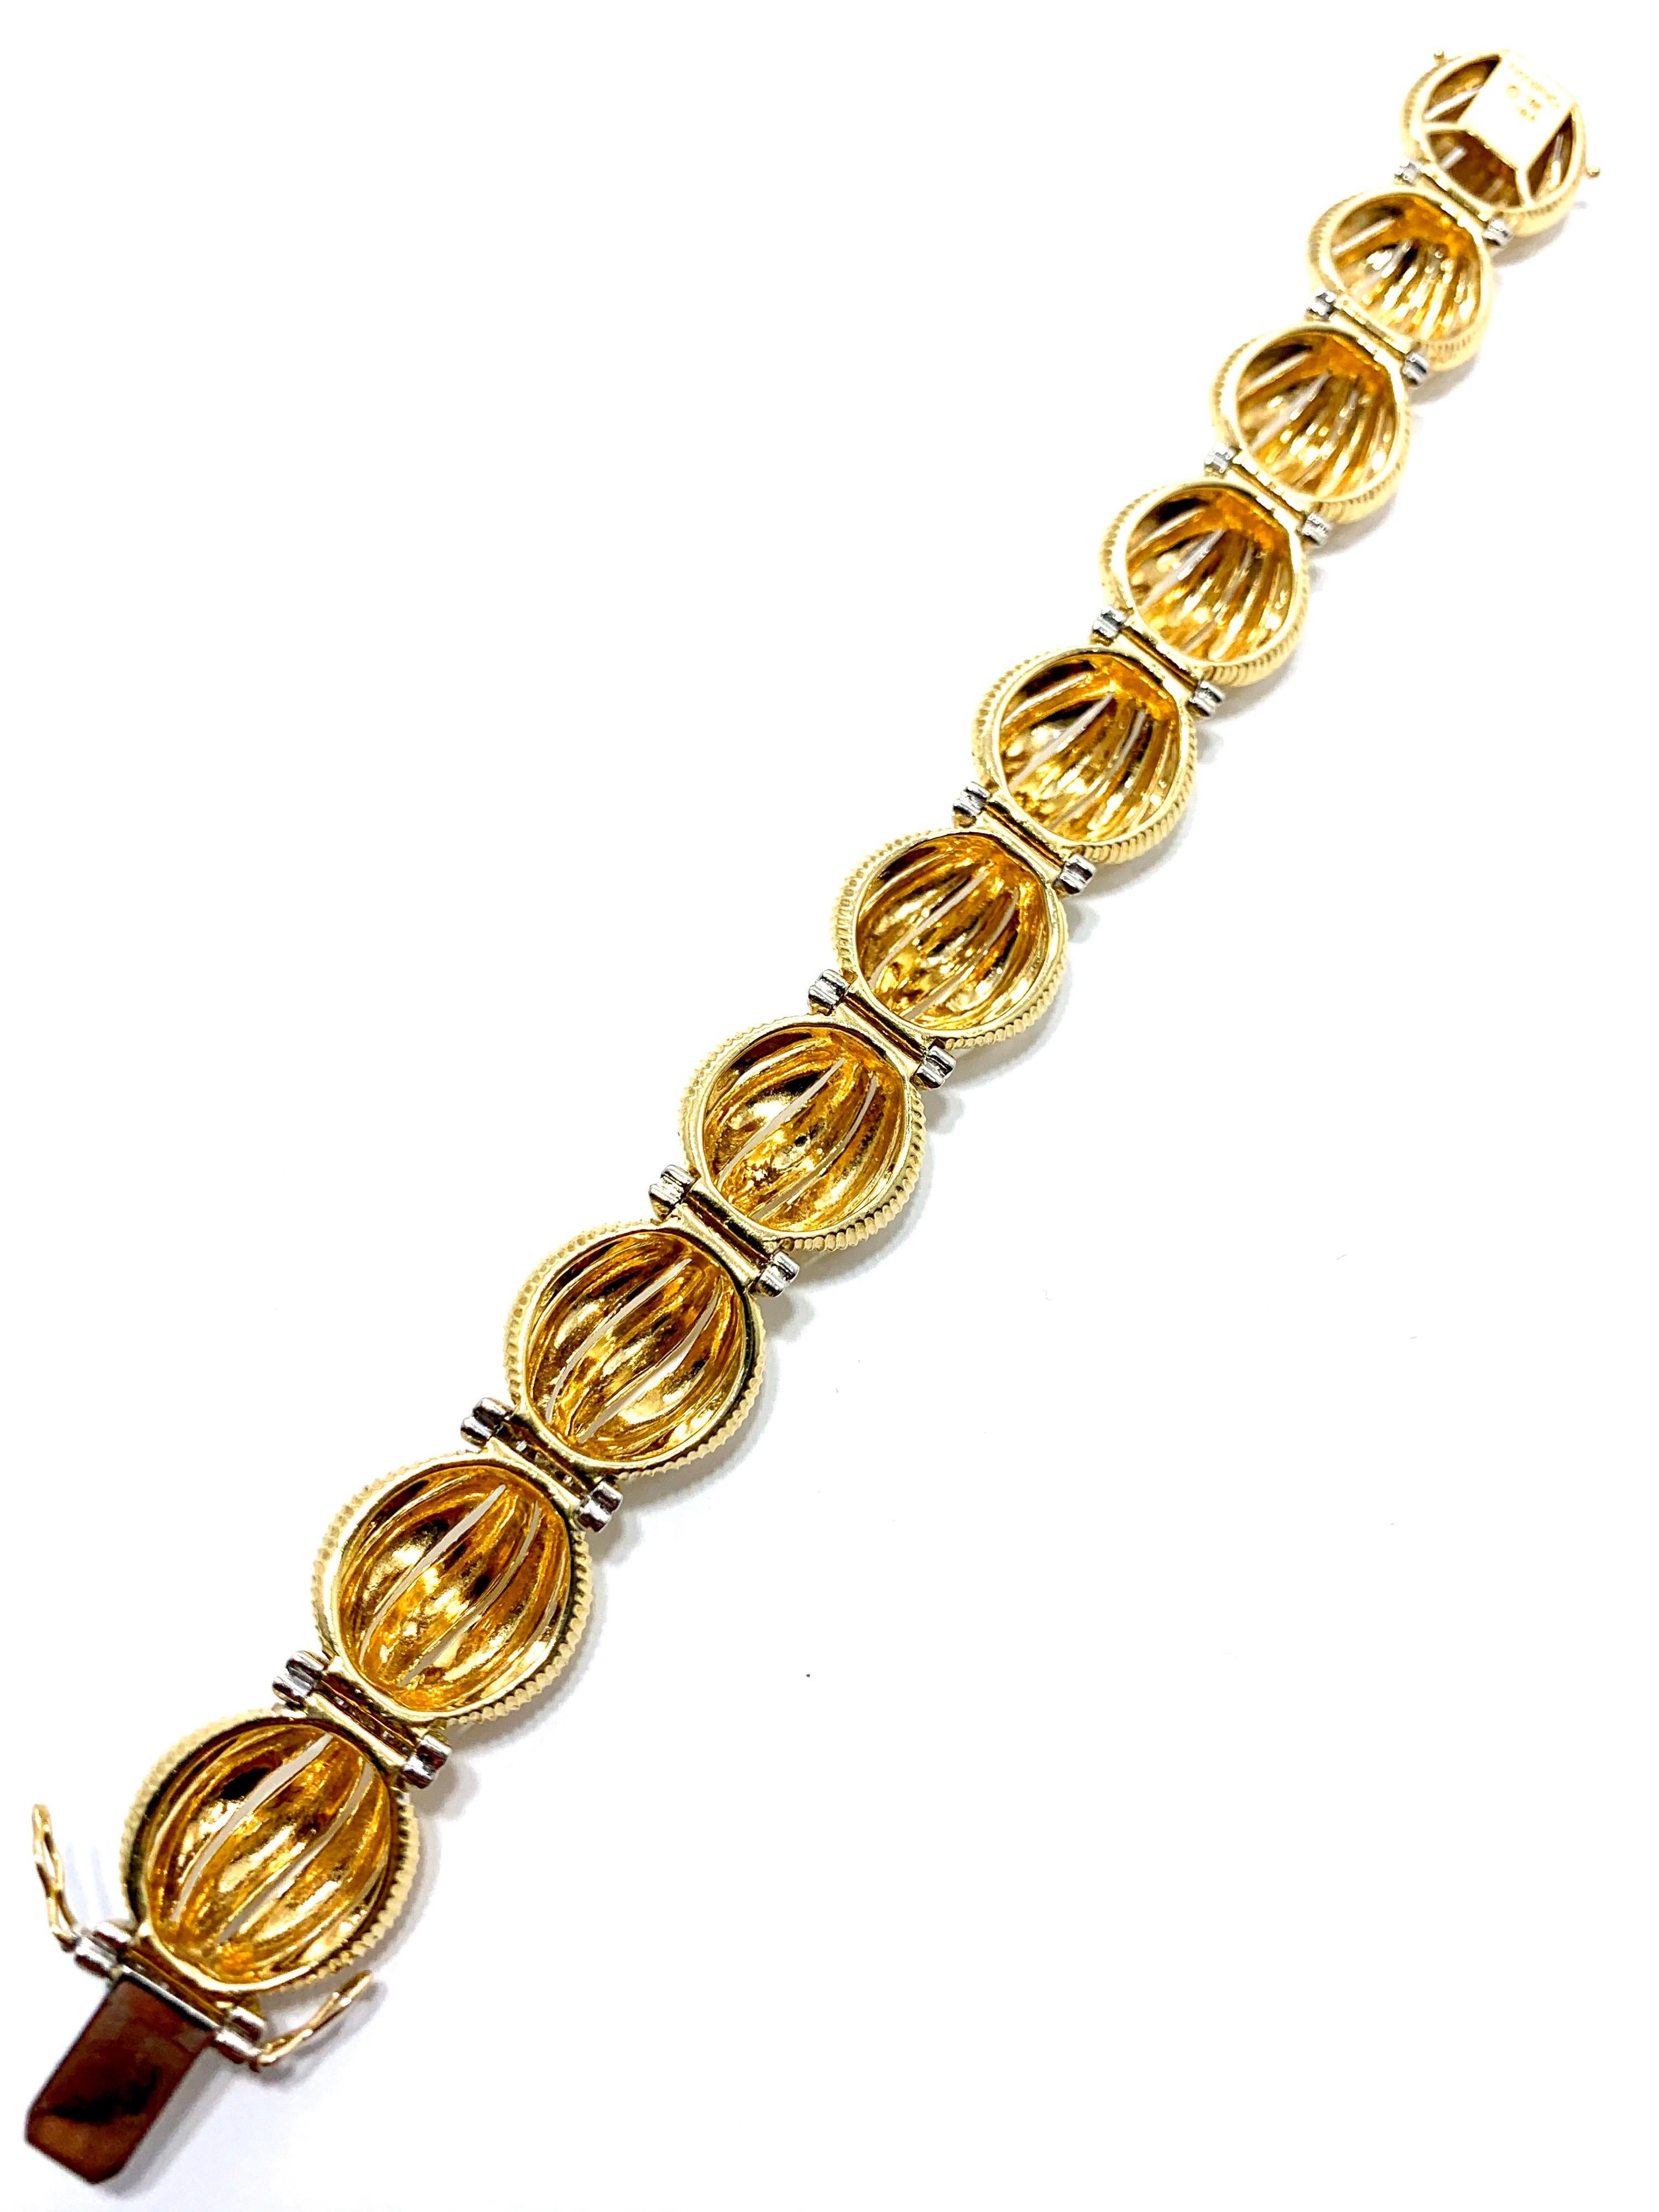 Tiffany & Co. 2.50 Carat Round Diamond and Domed Textured Gold Link Bracelet 1